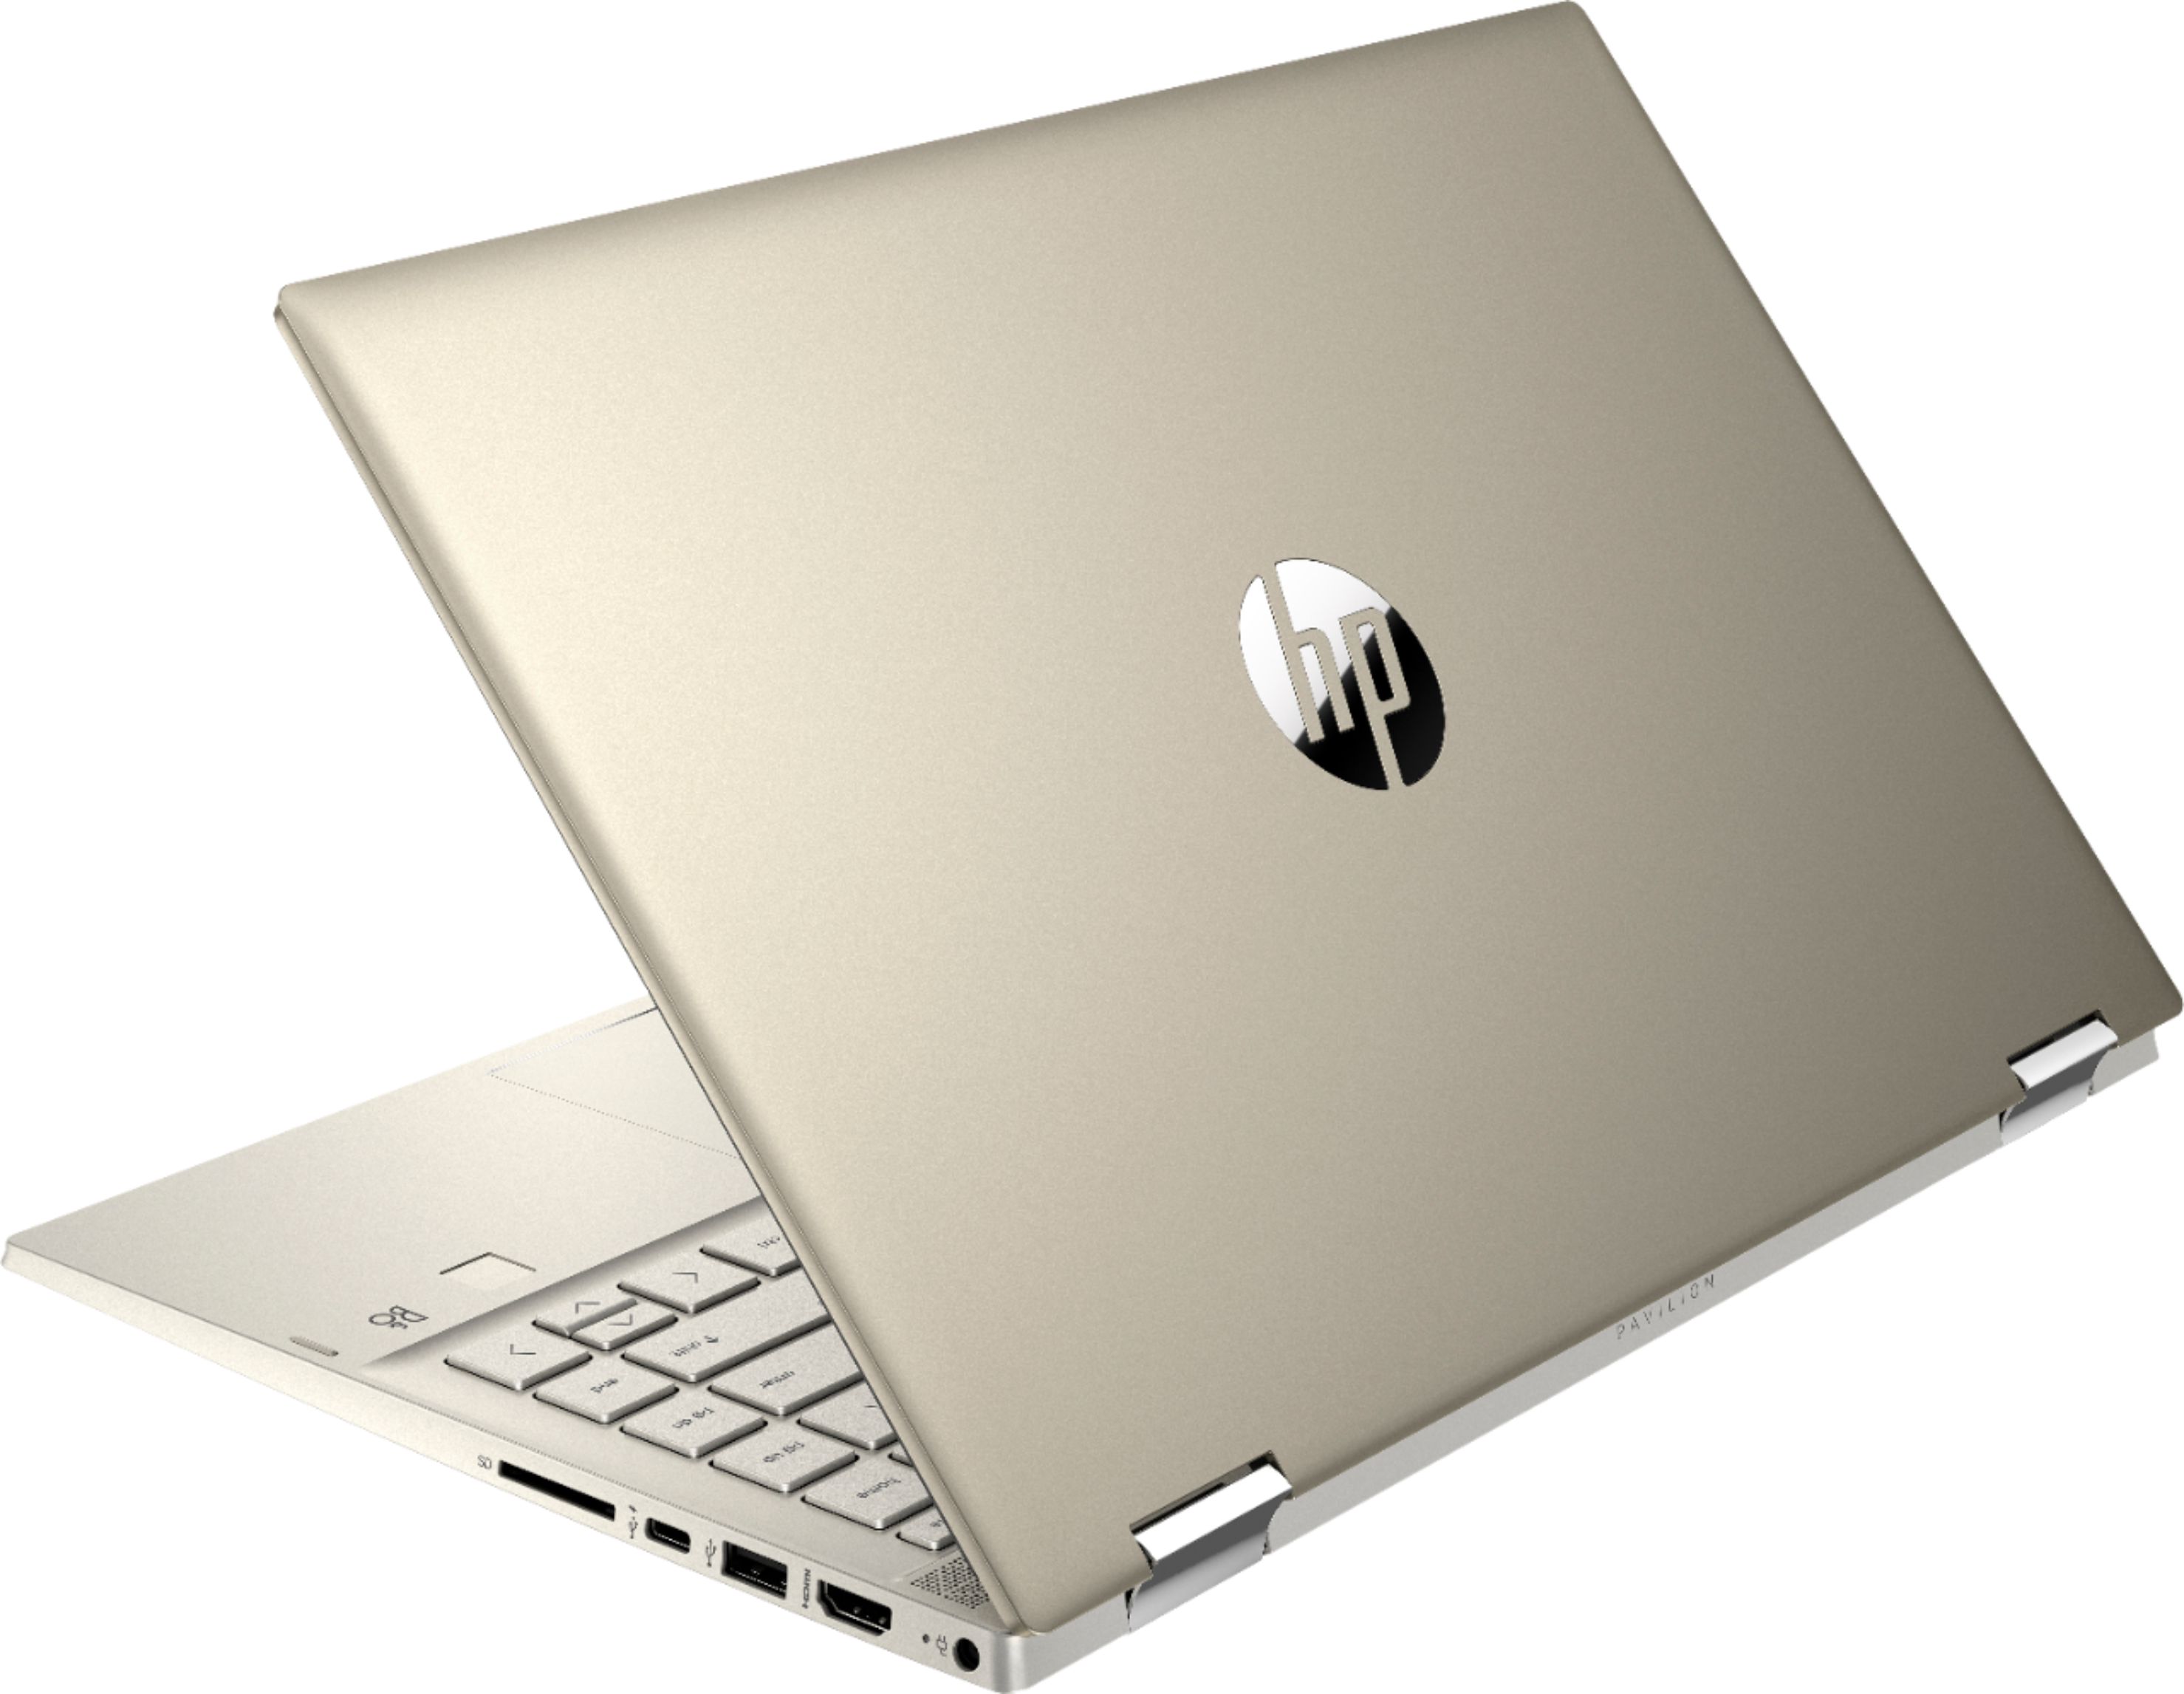 Customer Reviews Hp Pavilion X360 2 In 1 14 Touch Screen Laptop Intel Core I5 8gb Memory 256gb 5754